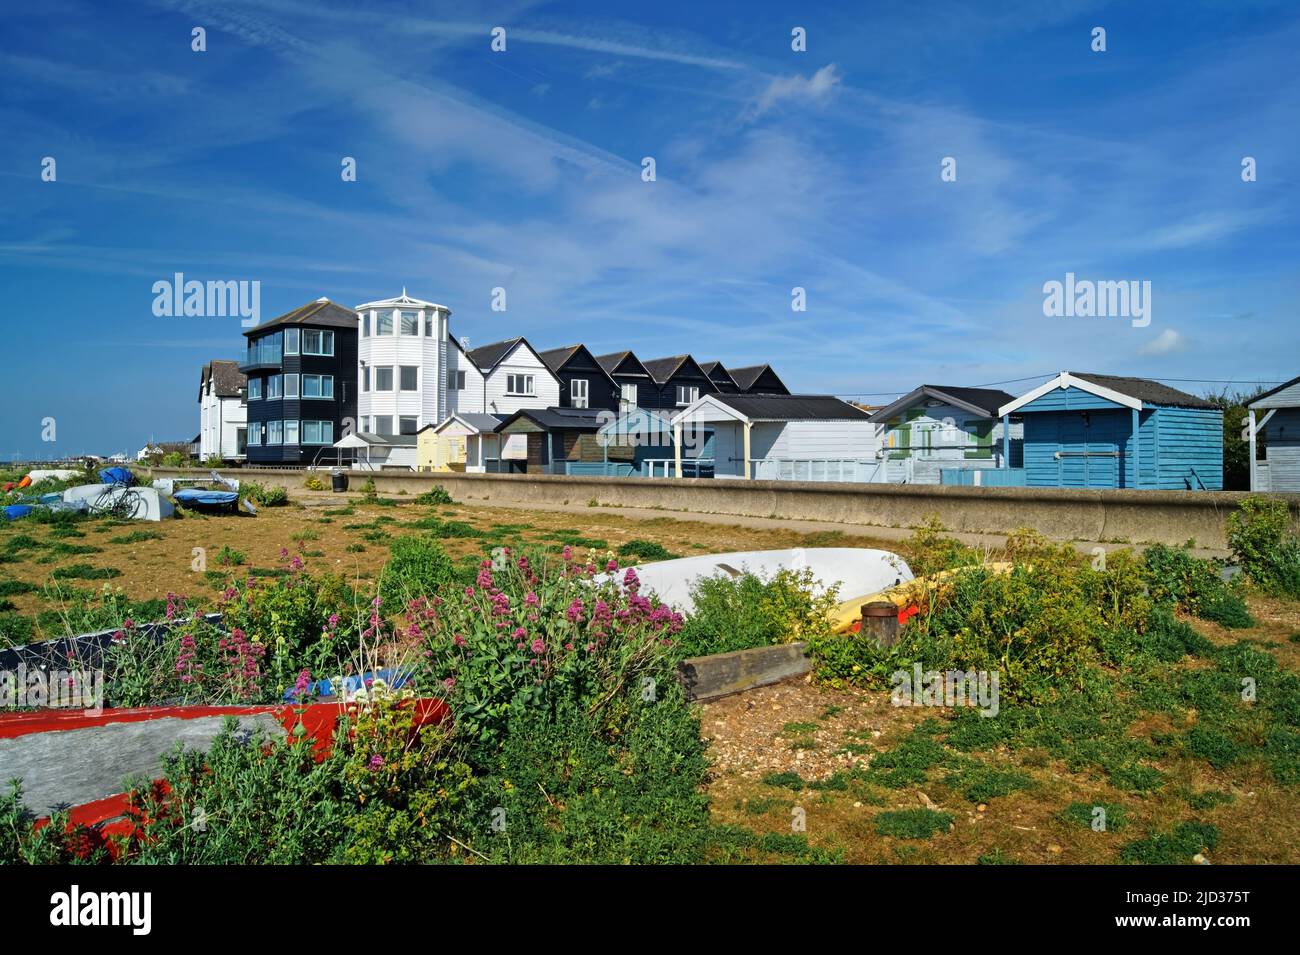 UK, Kent, Whitstable Beach Huts, Overturned Boats and Apartments Stock Photo